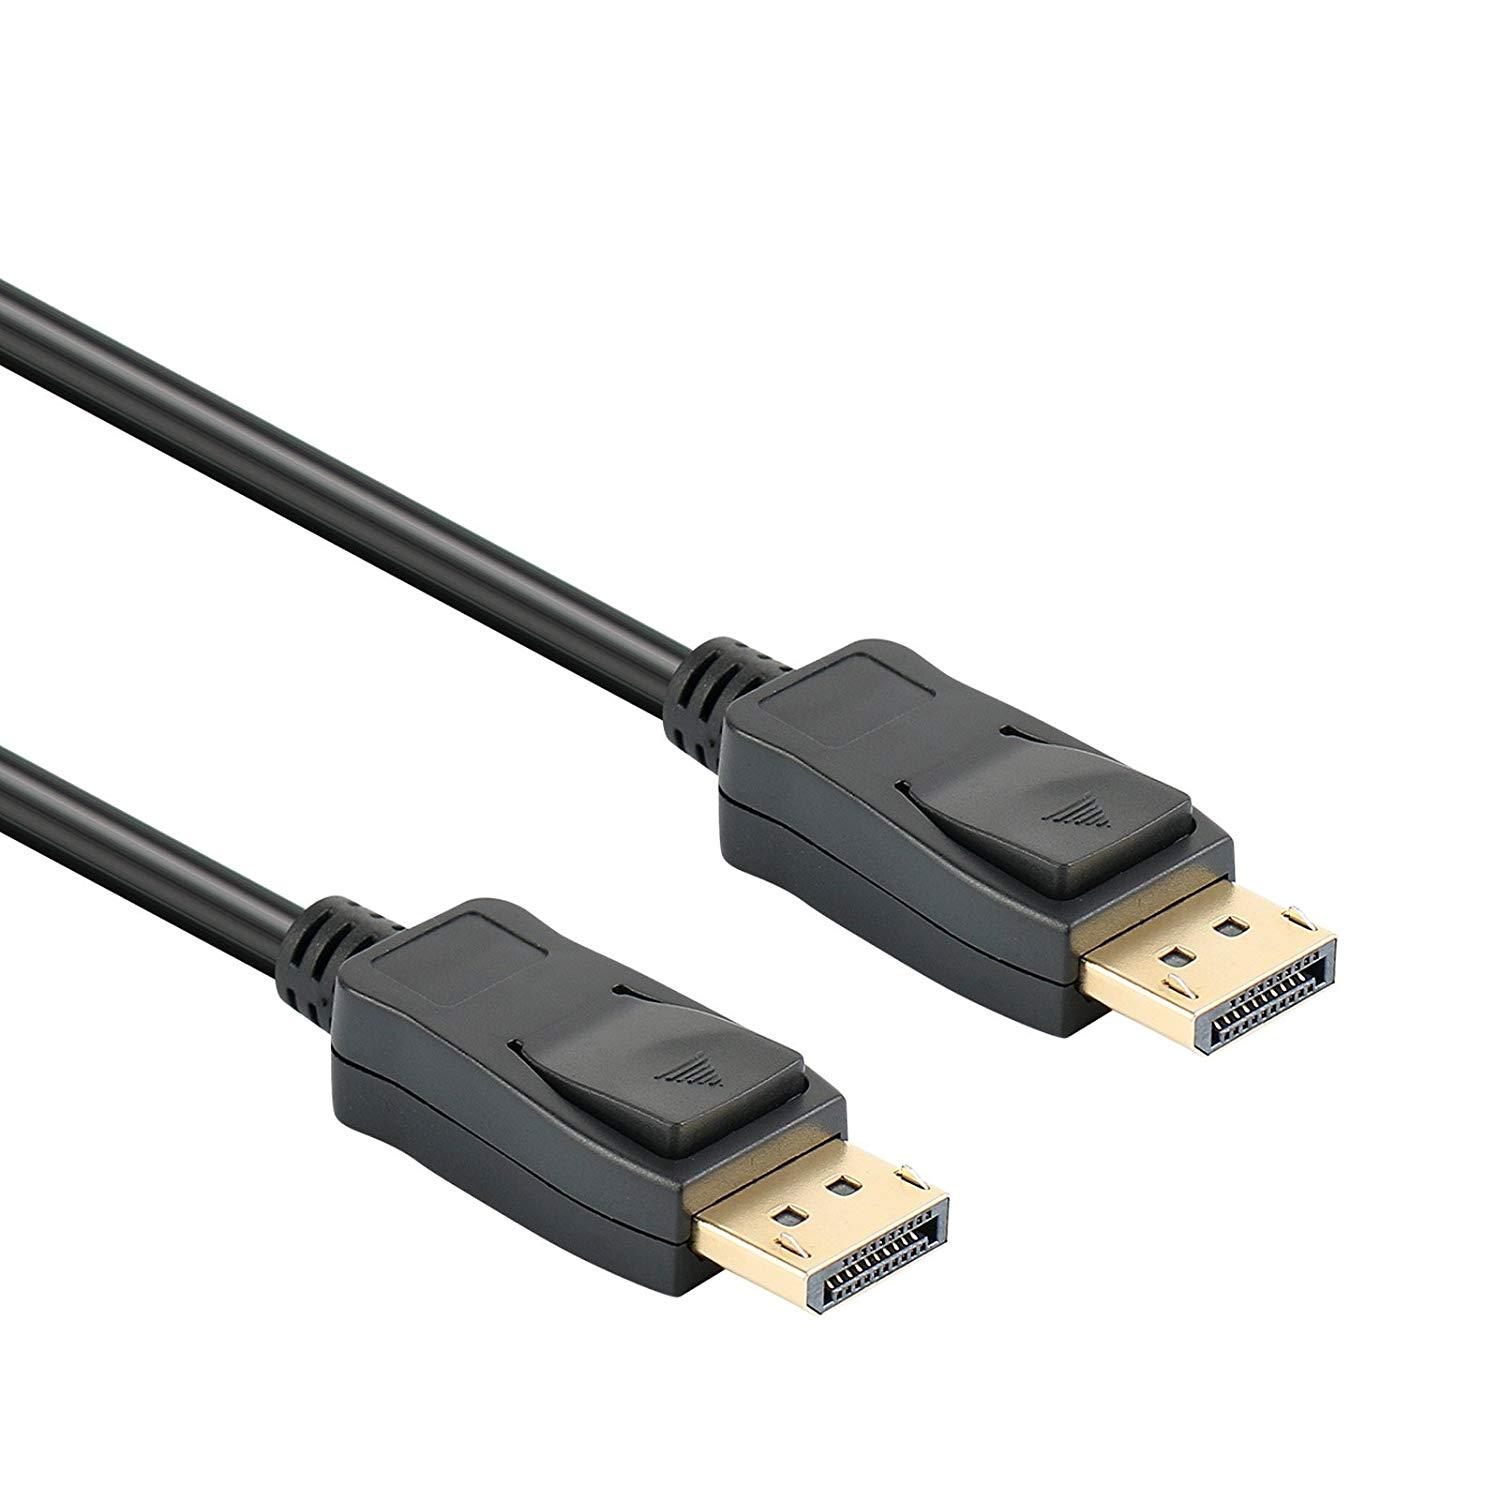 Lenovo Display Port Cable - 3 Meters - Store 974 | ستور ٩٧٤